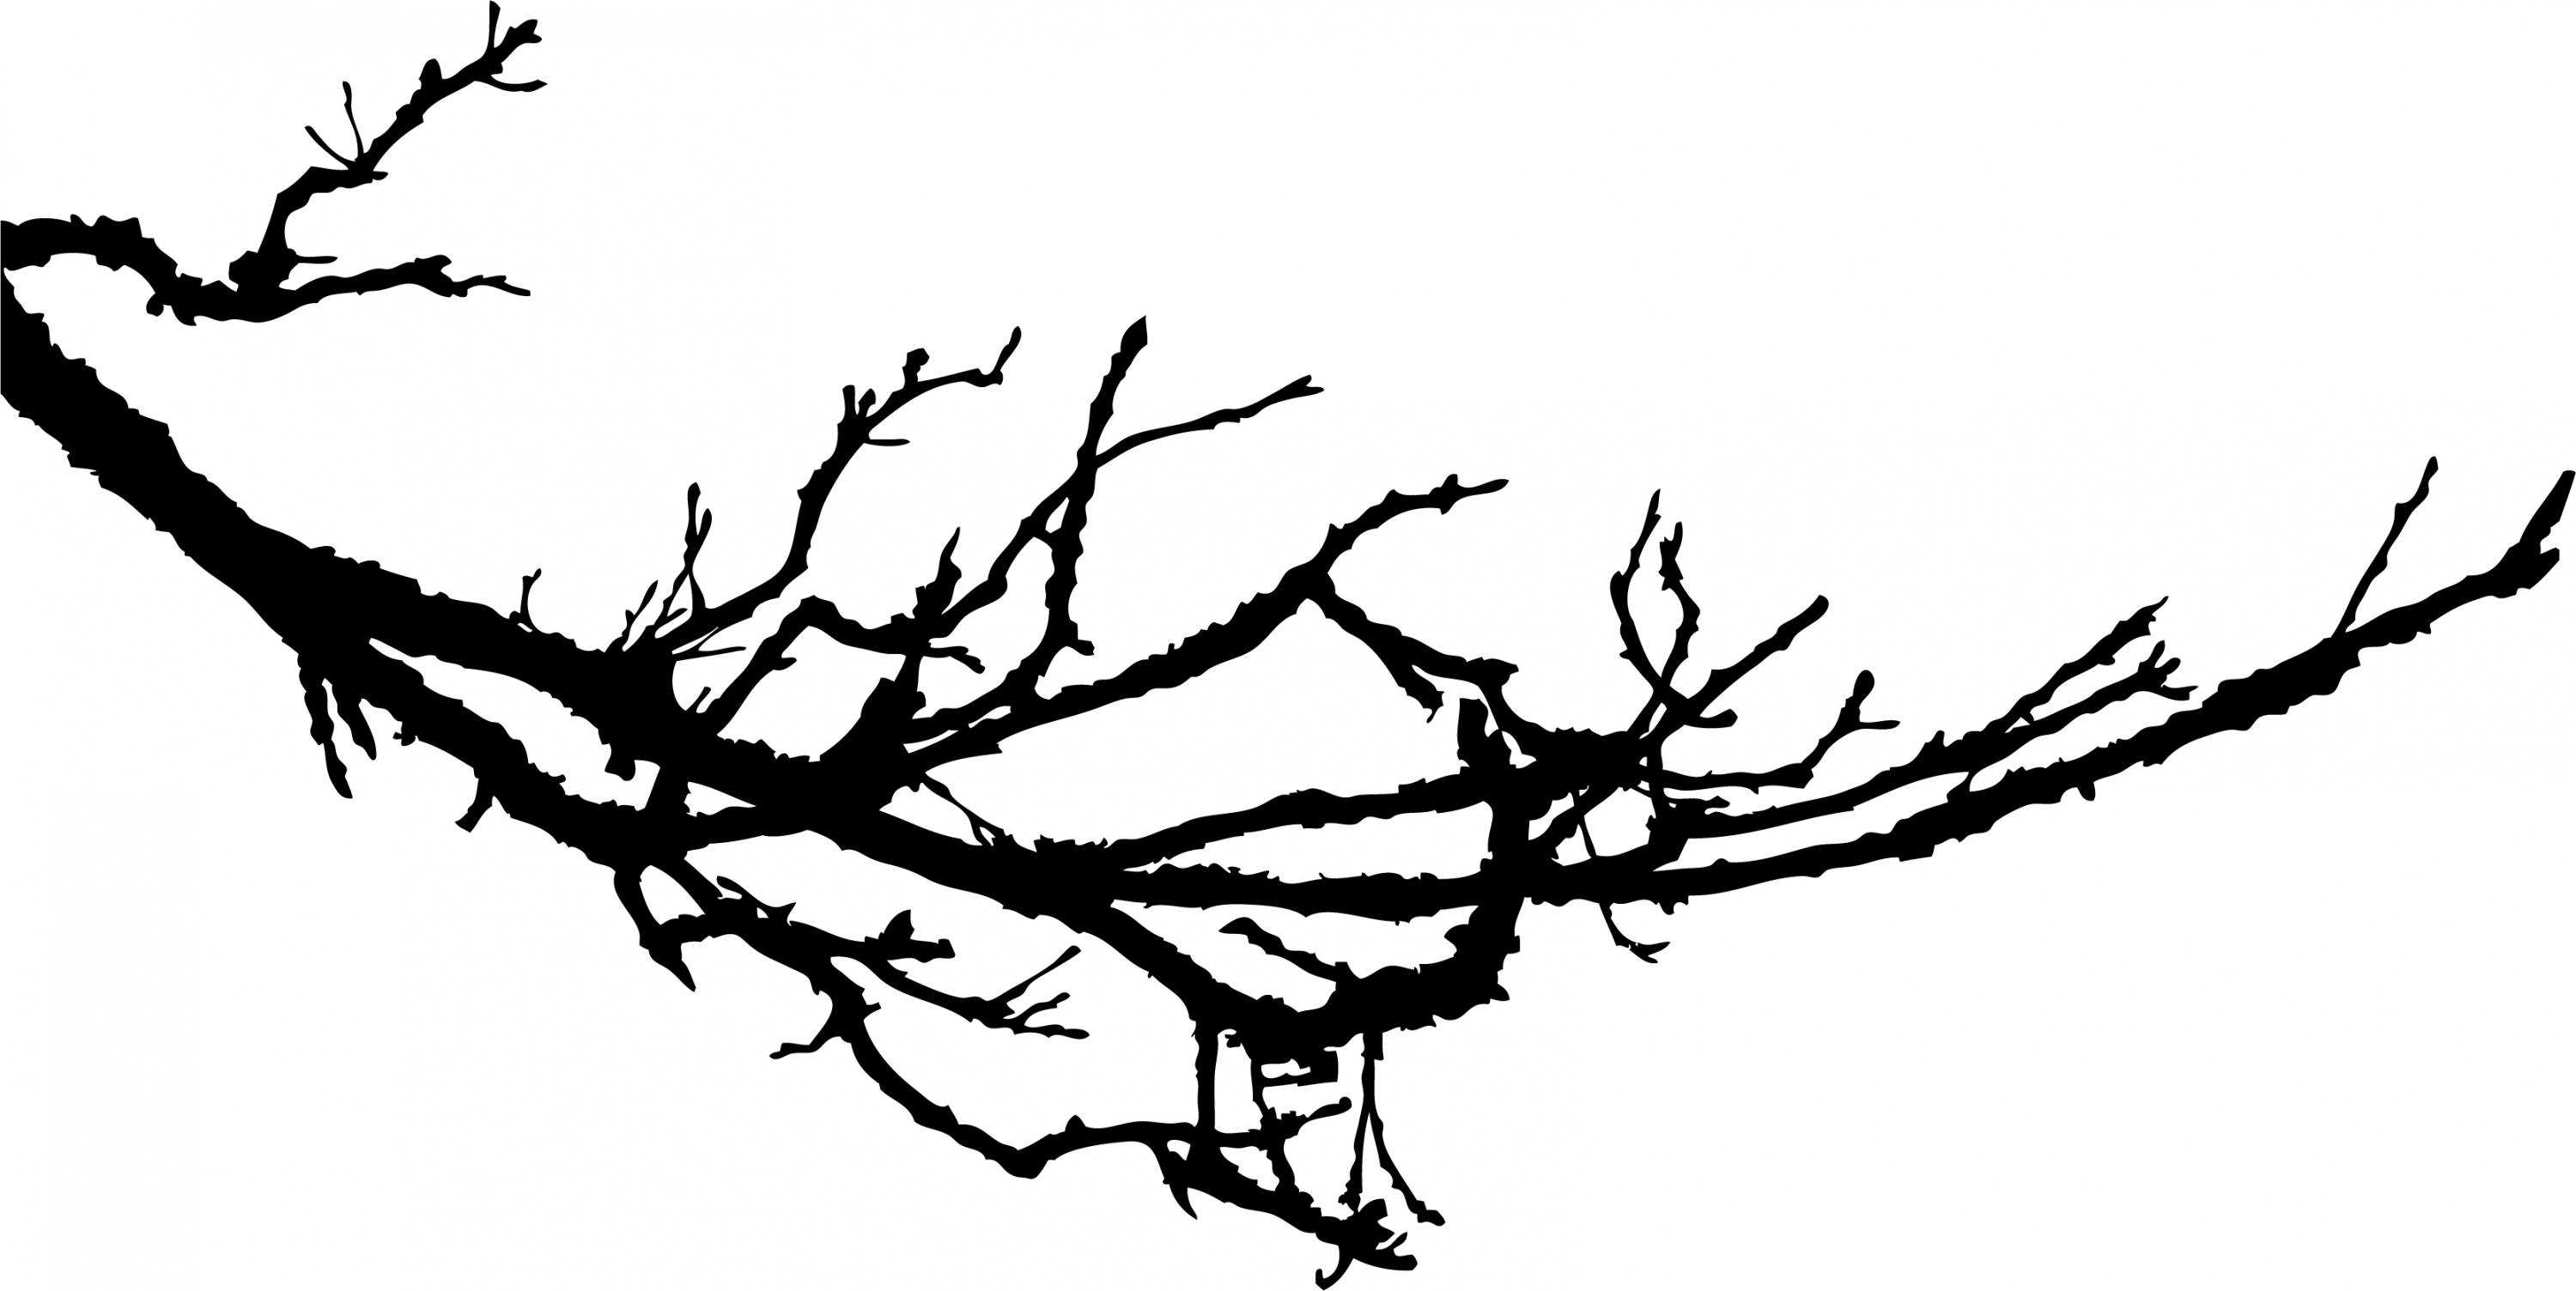 Clipart Tree Branch Silhouette.